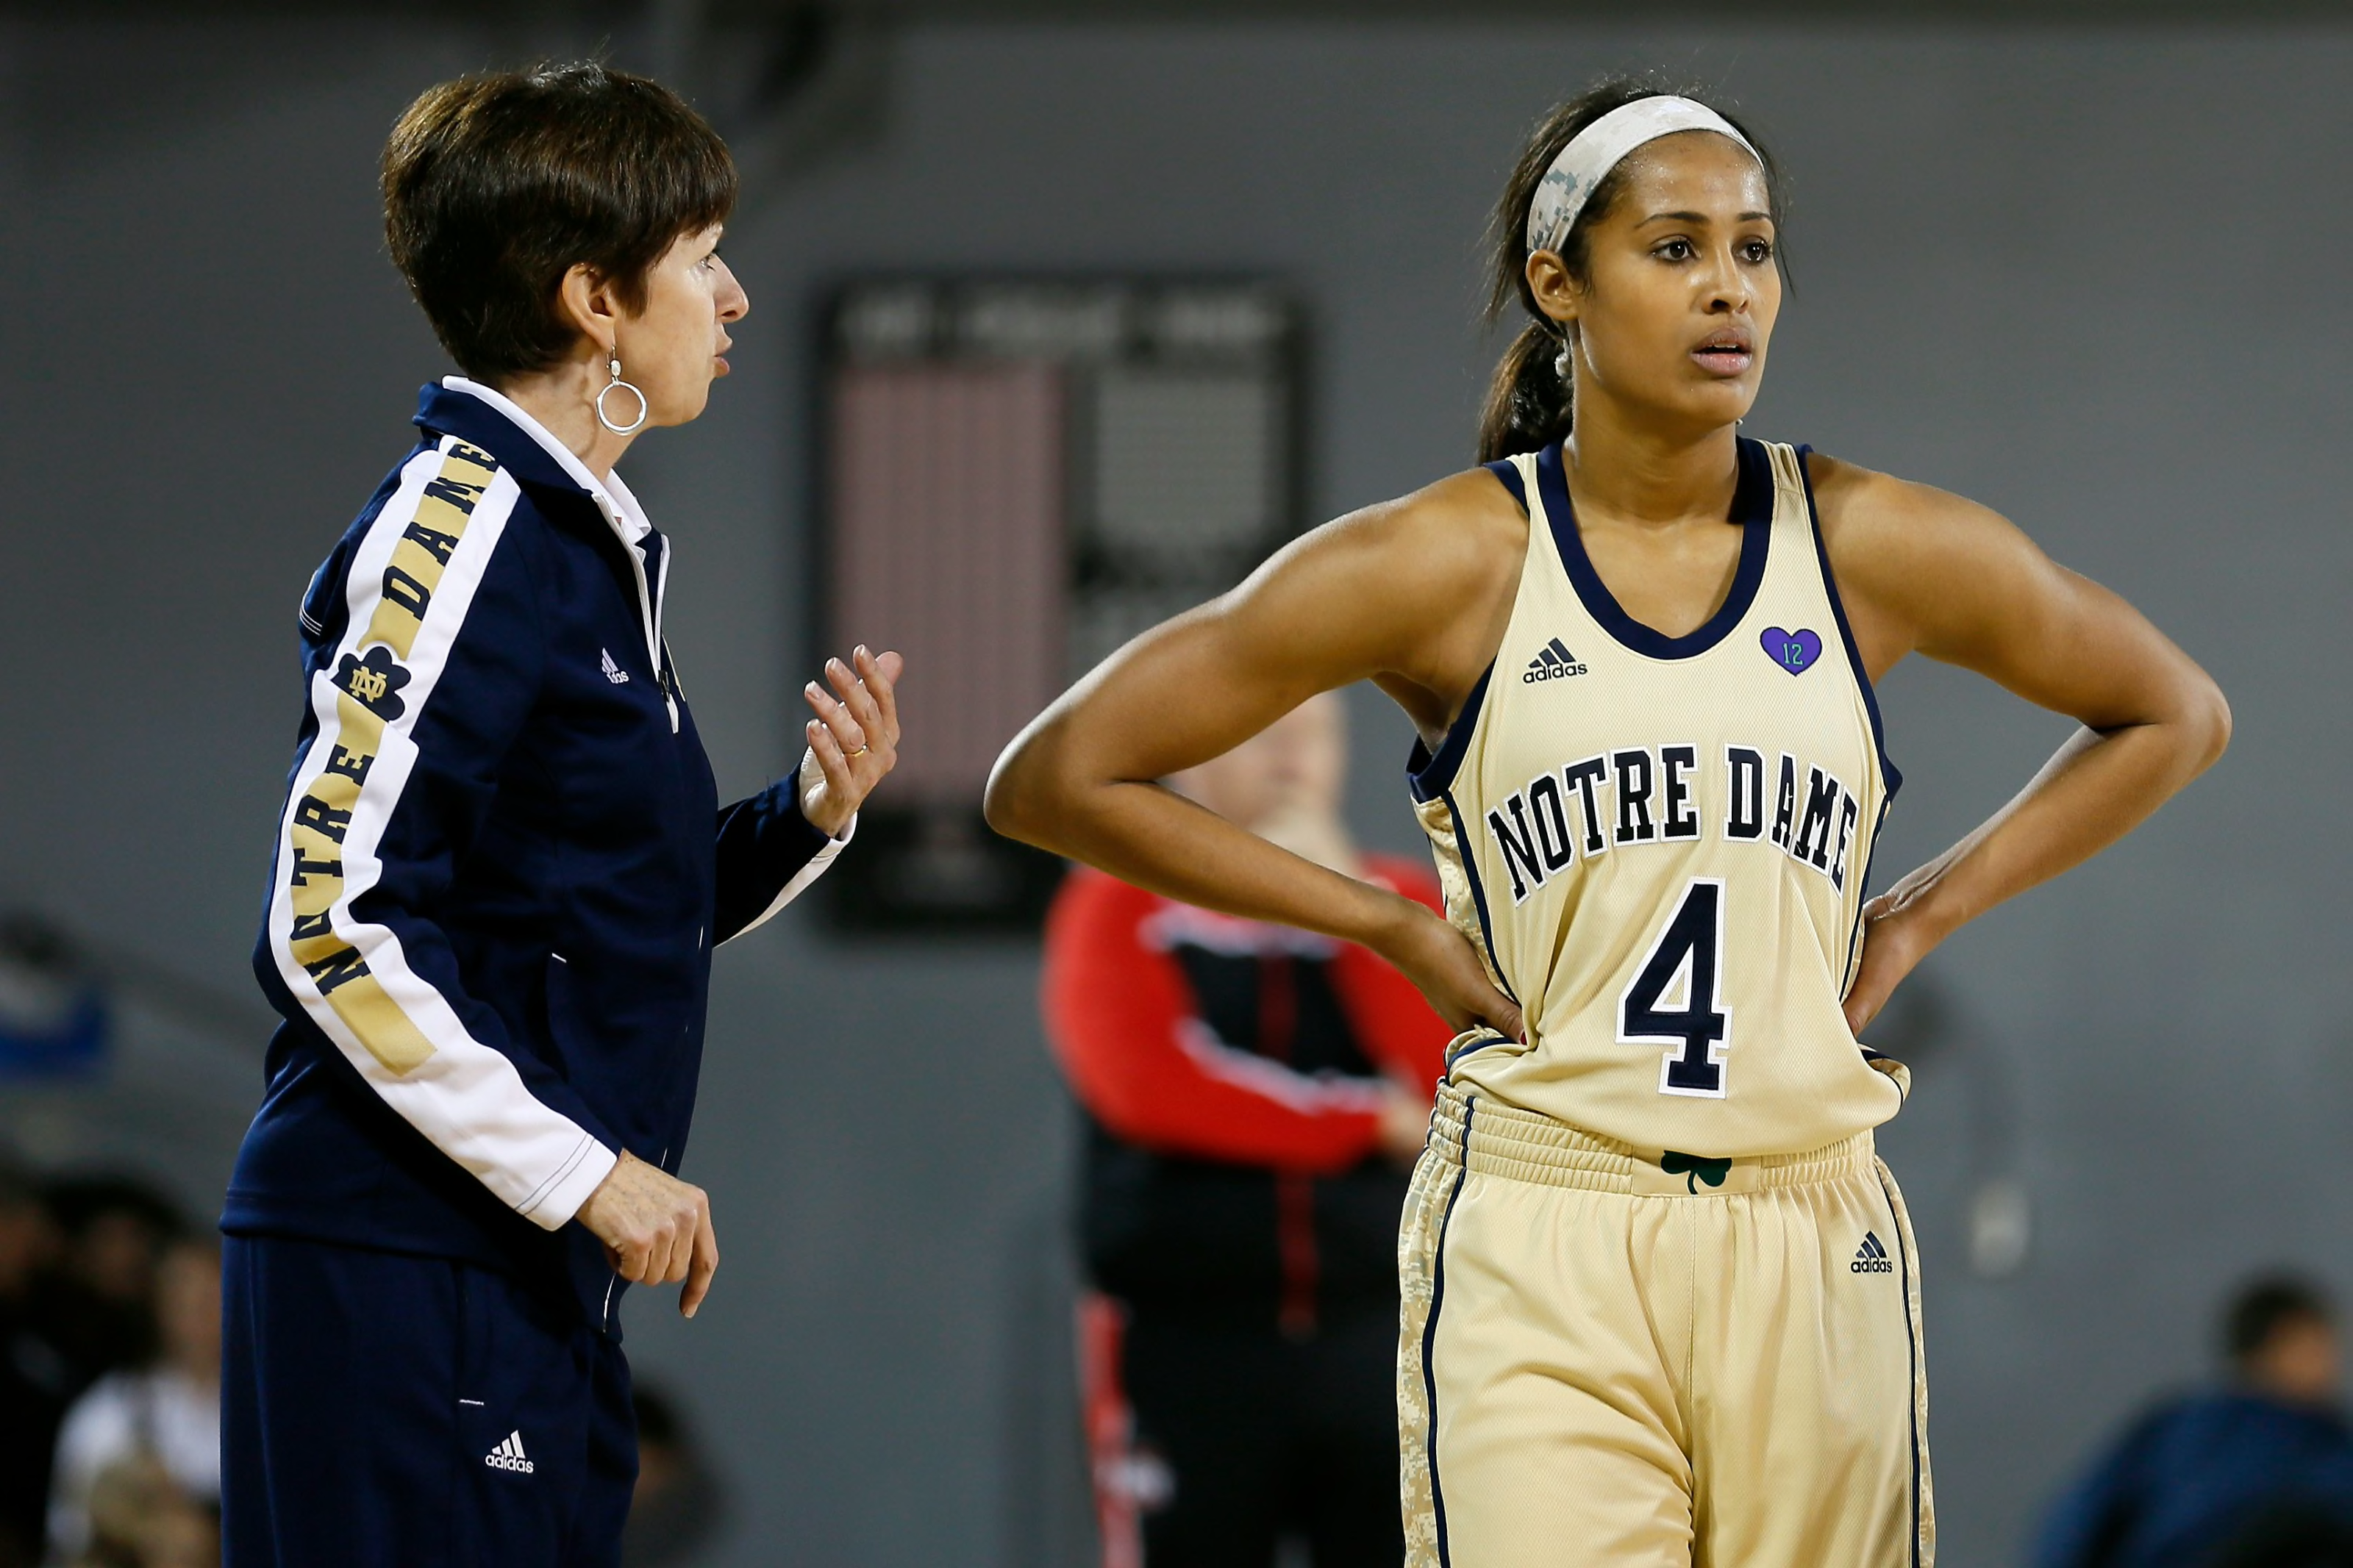 Notre Dame Women's Basketball: The 4 Best Players of the McGraw Era